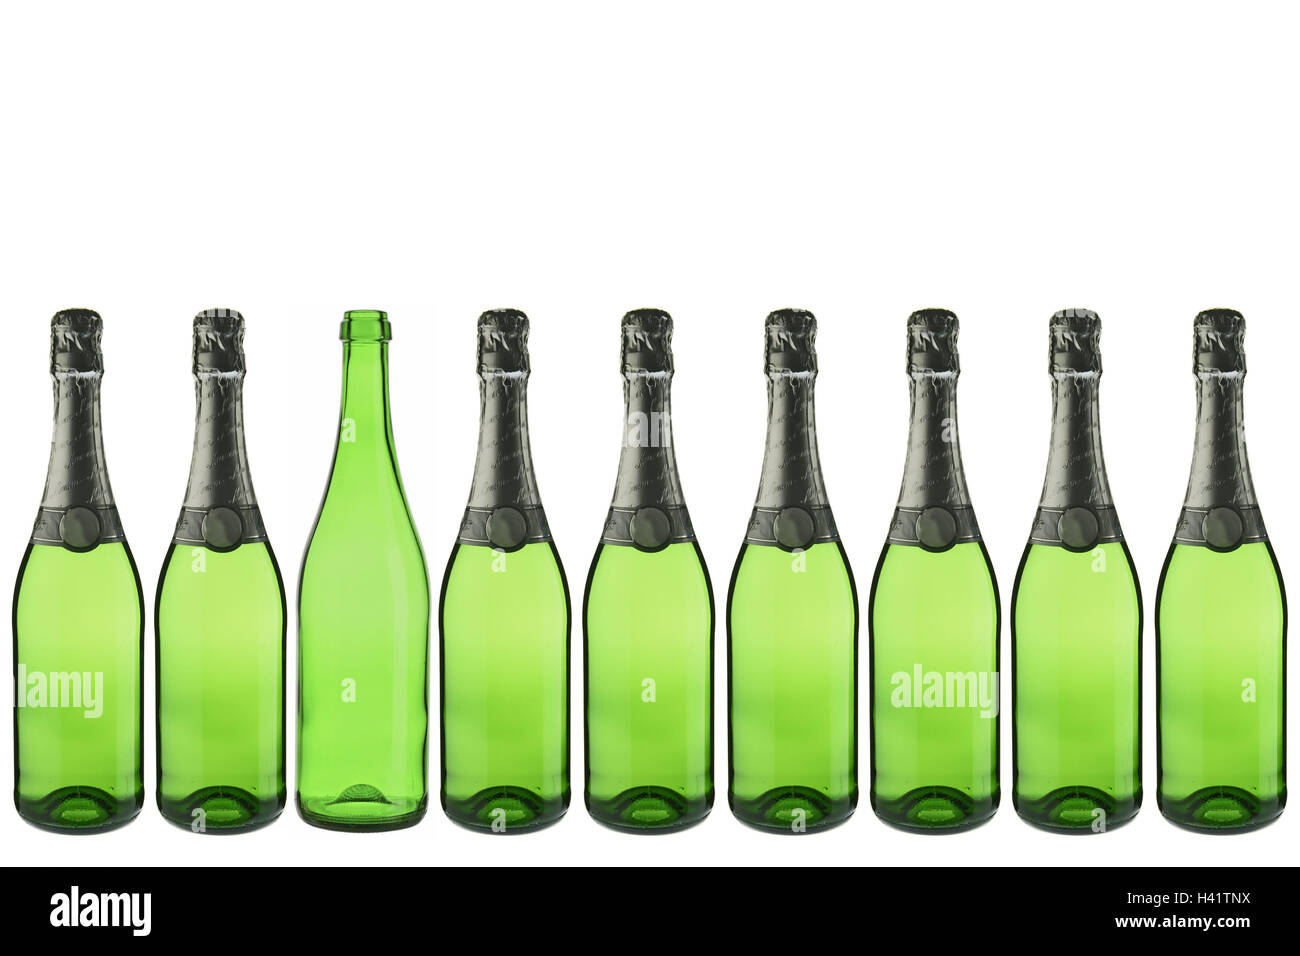 Champagne bottles, fully, unlabeled,   side by side, individual bottle, empty,   Bottles, glass bottles, champagne bottles, green, green glass, filled, filled, beverage, champagne, champagne, alcohol, many, strung, row, order, conformity, bottle, drunk up Stock Photo